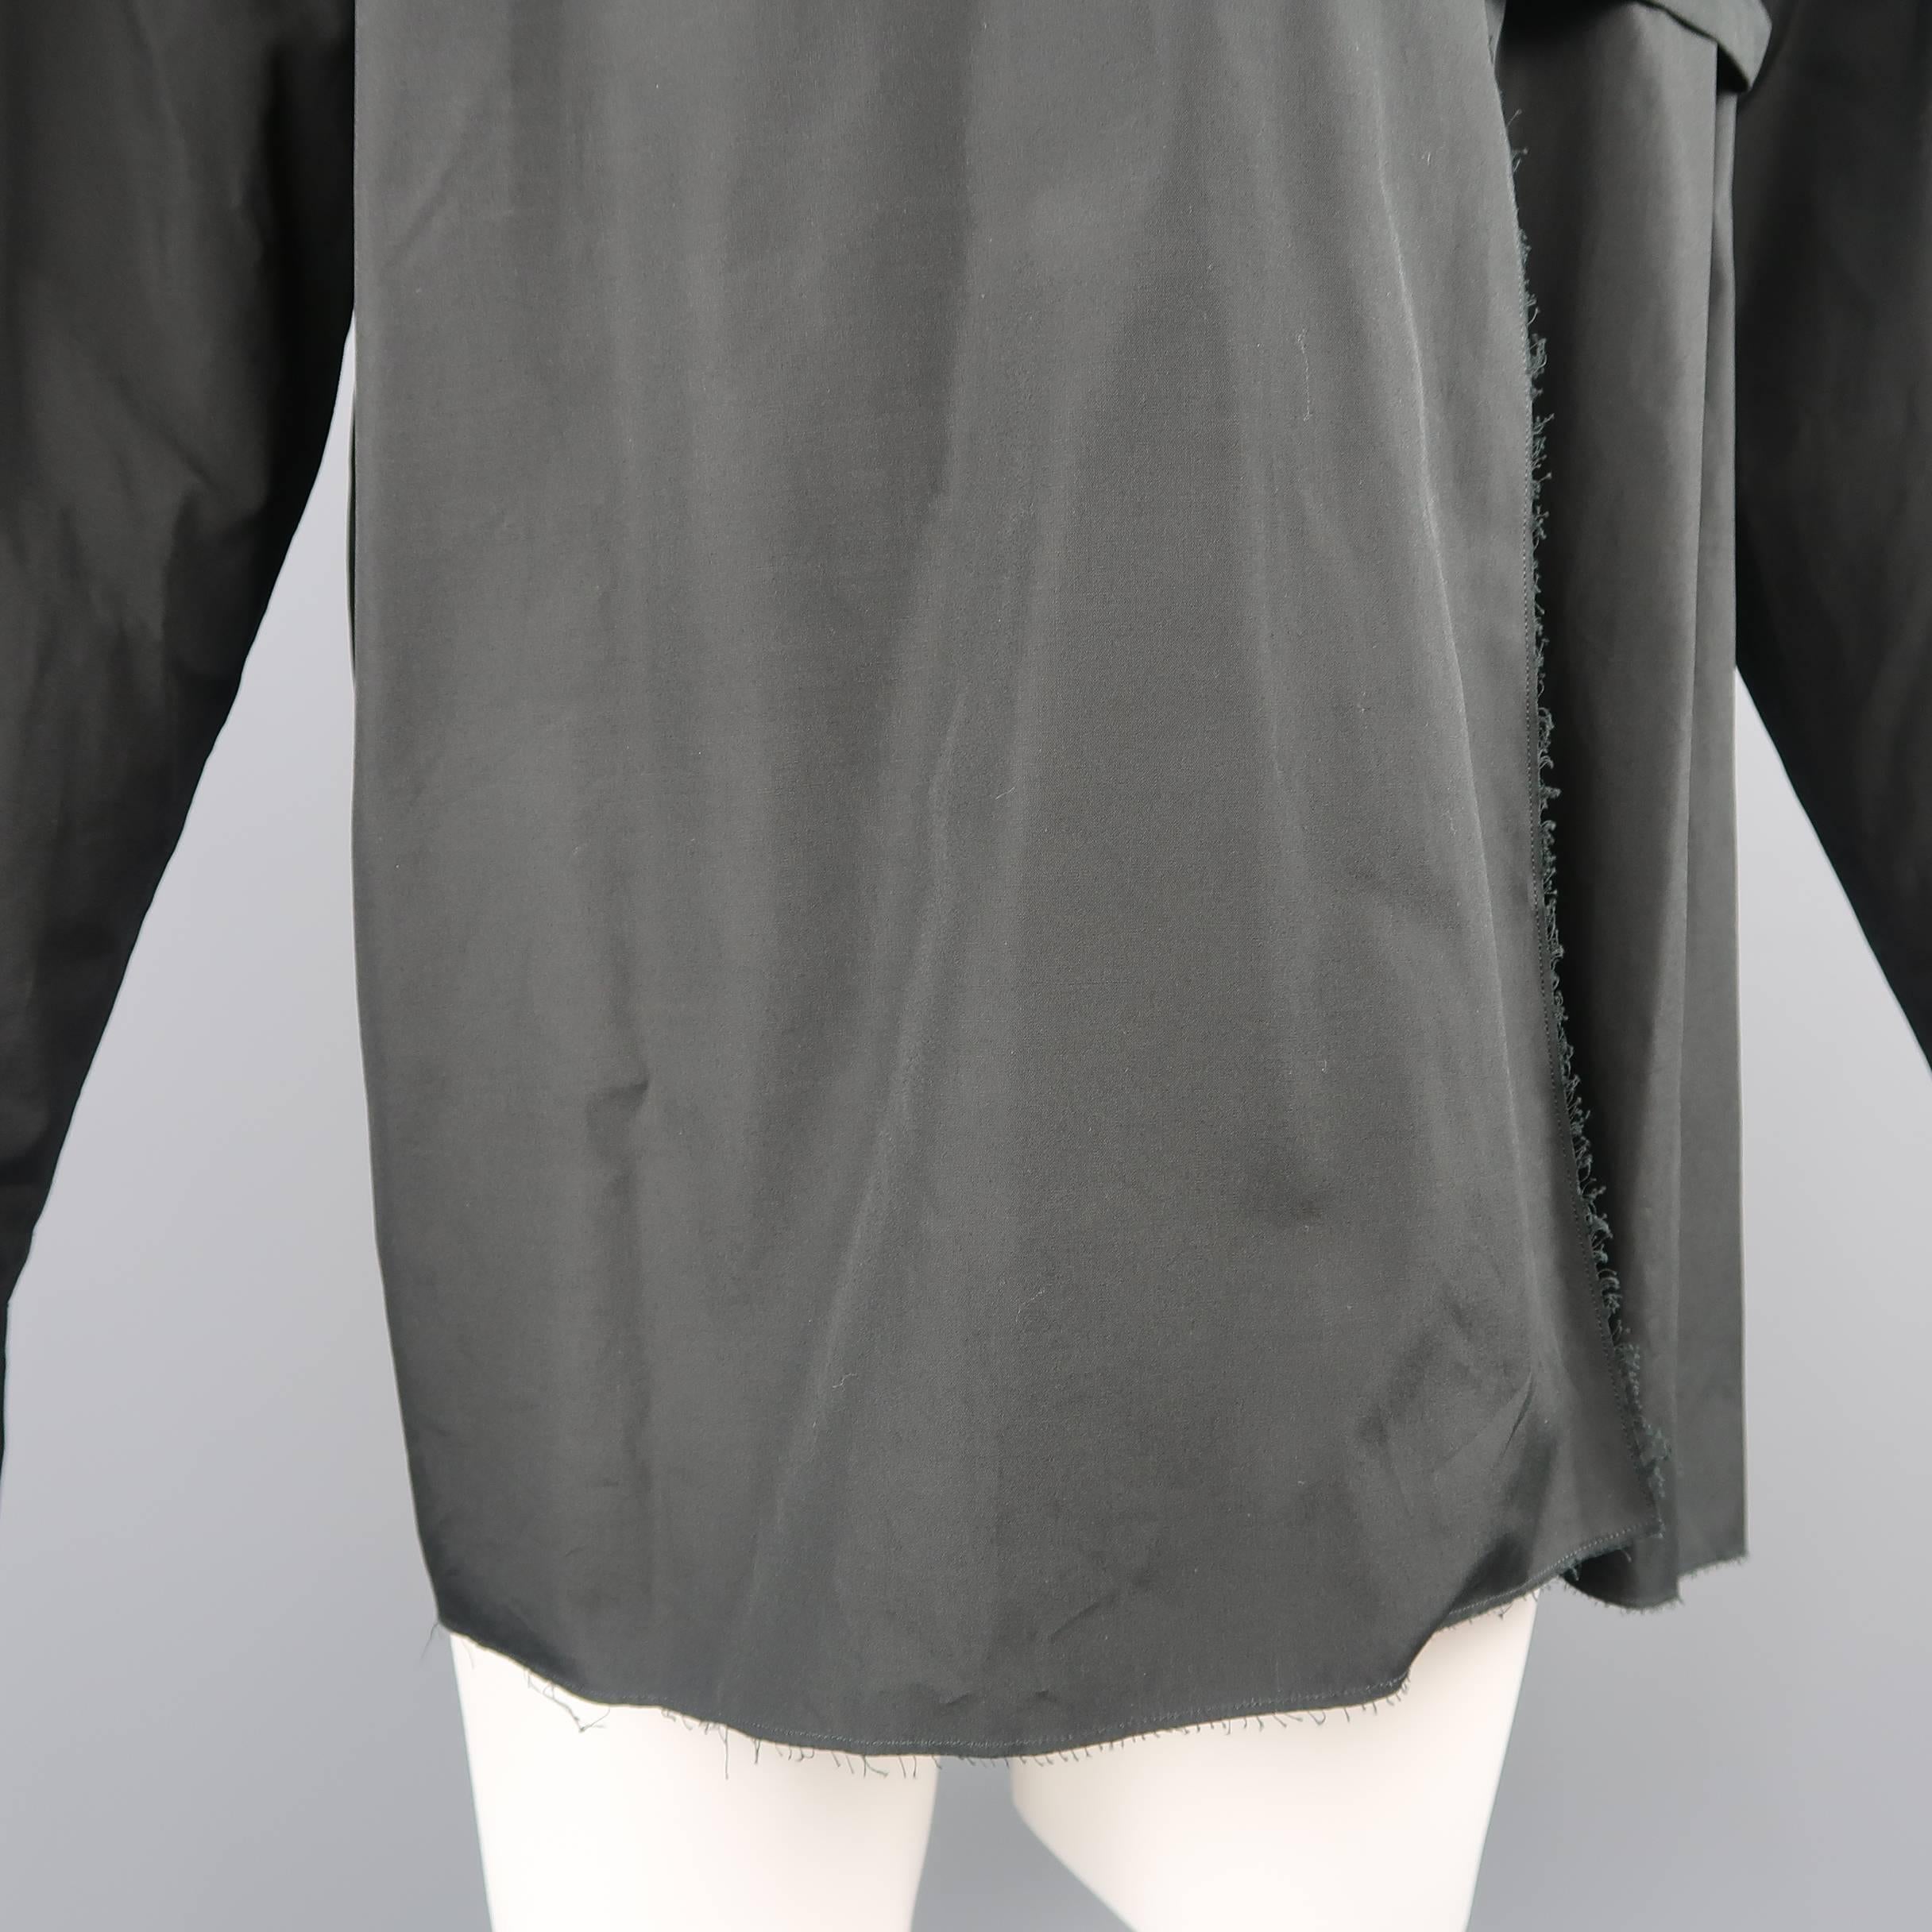 Marni oversized shirt comes in classic cotton fabric with raw frayed edges, v neck with folded collar, and single button with internal strap closure. Made in Italy.
 
Excellent Pre-Owned Condition.
Marked: IT 48
 
Measurements:
 
Shoulder: 21